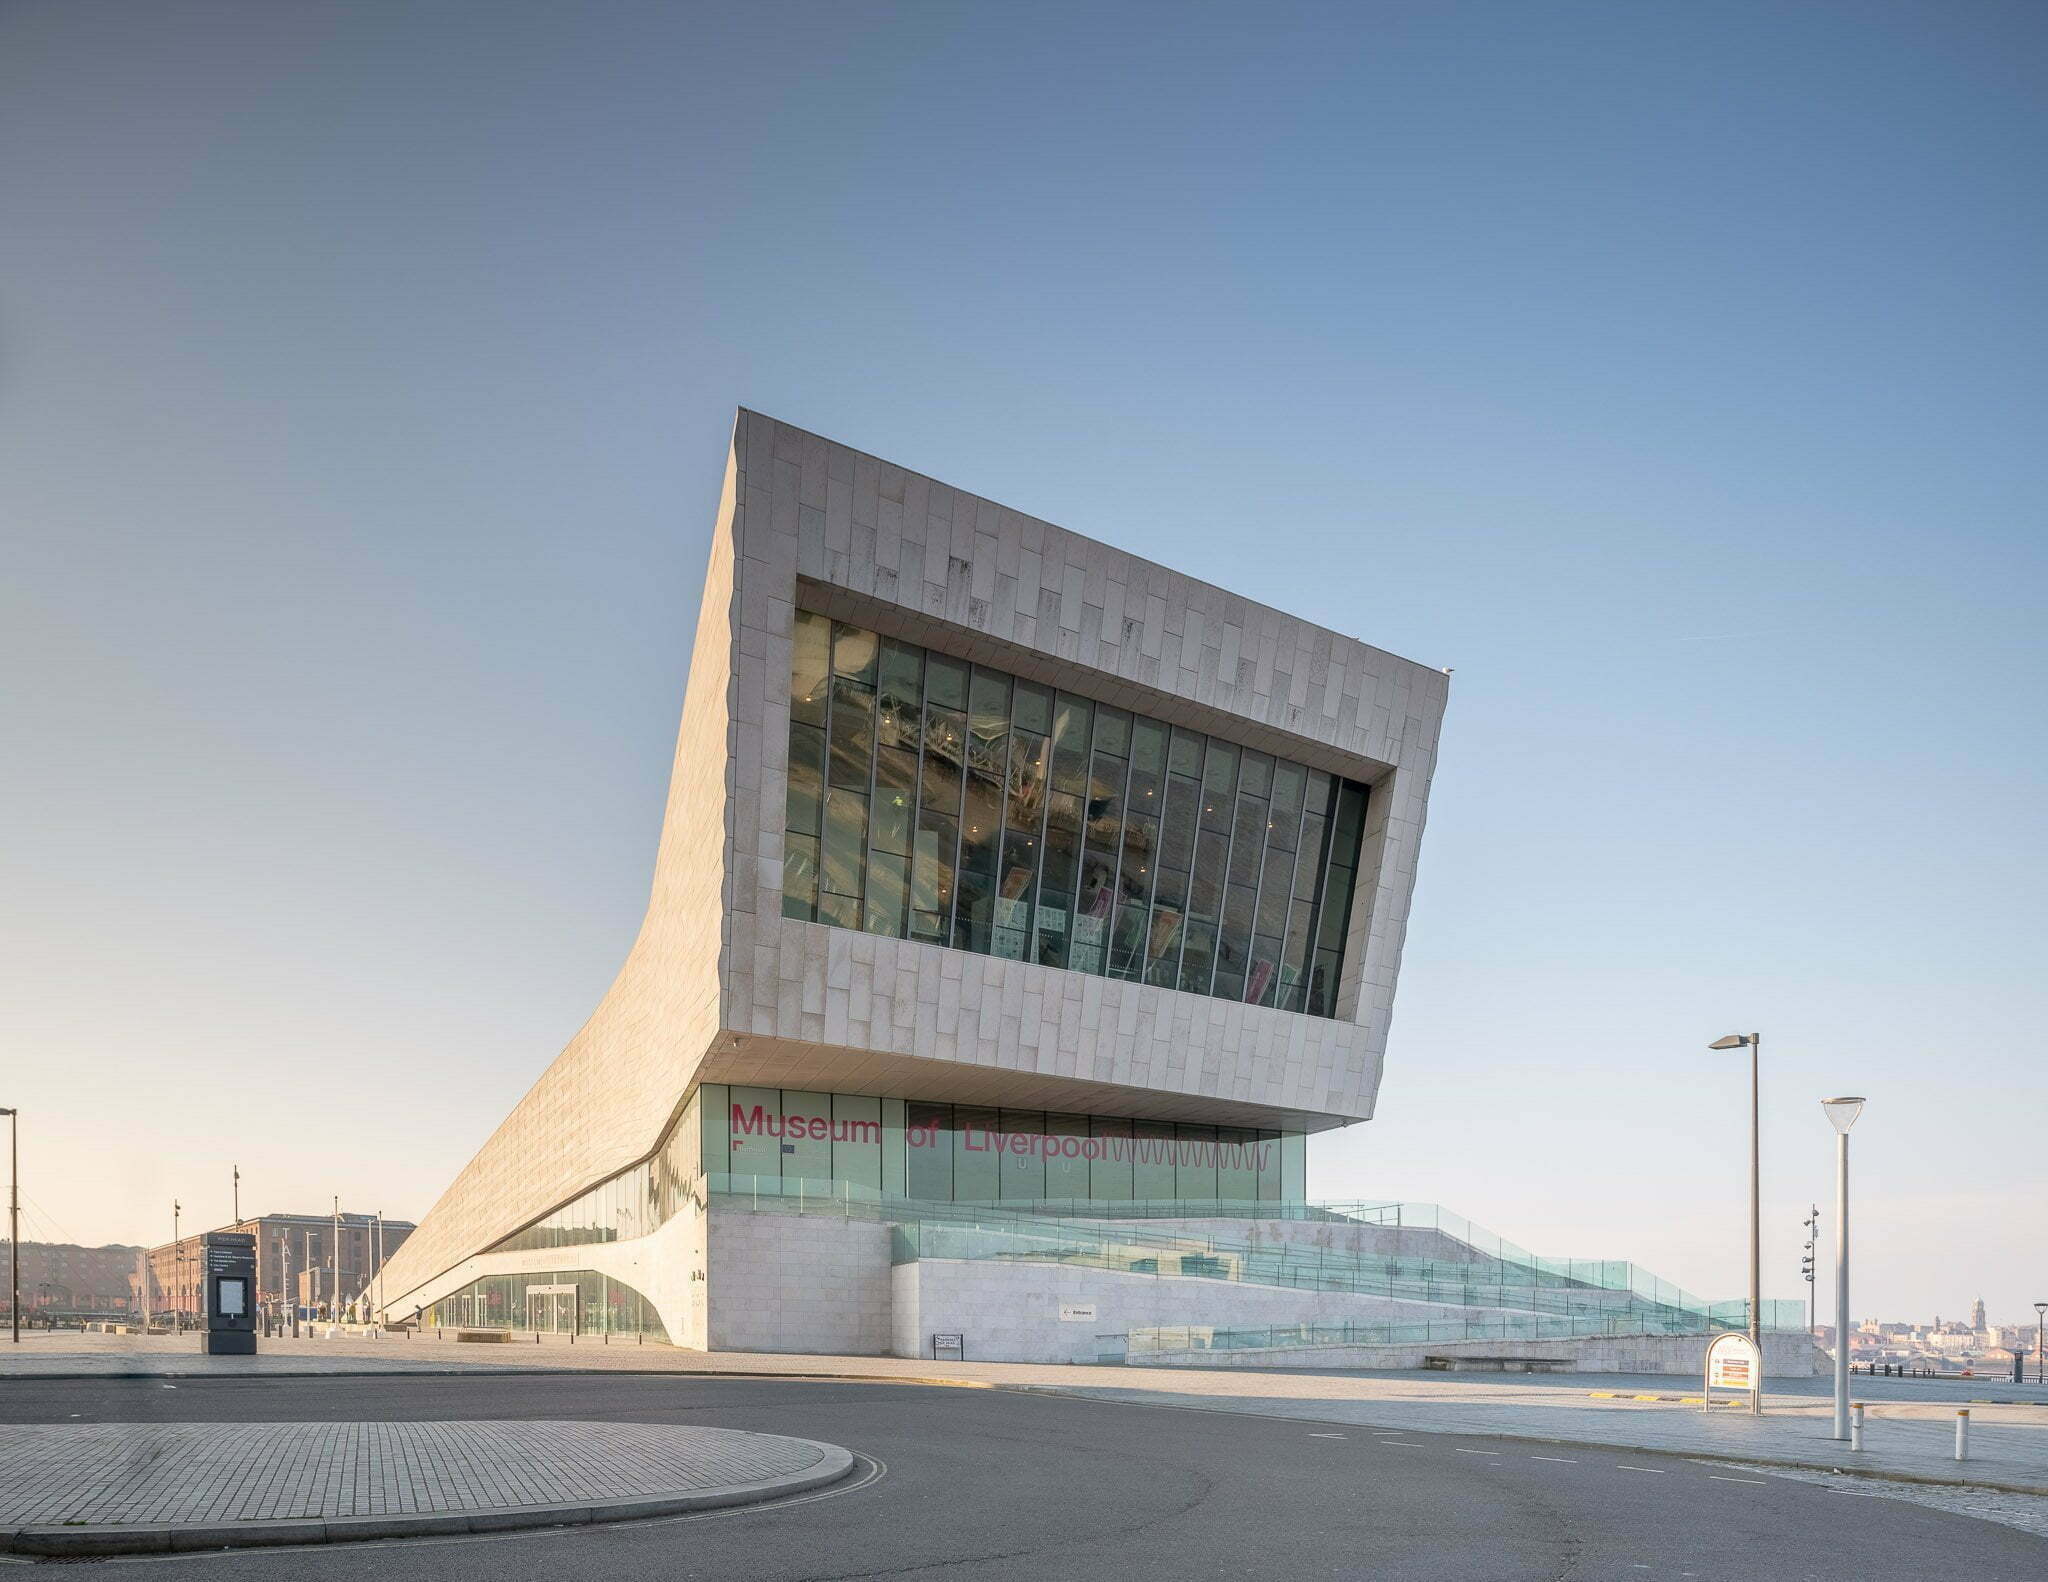 Wide view of the Museum of Liverpool from across the road. It is a sunny day with no clouds in the sky.